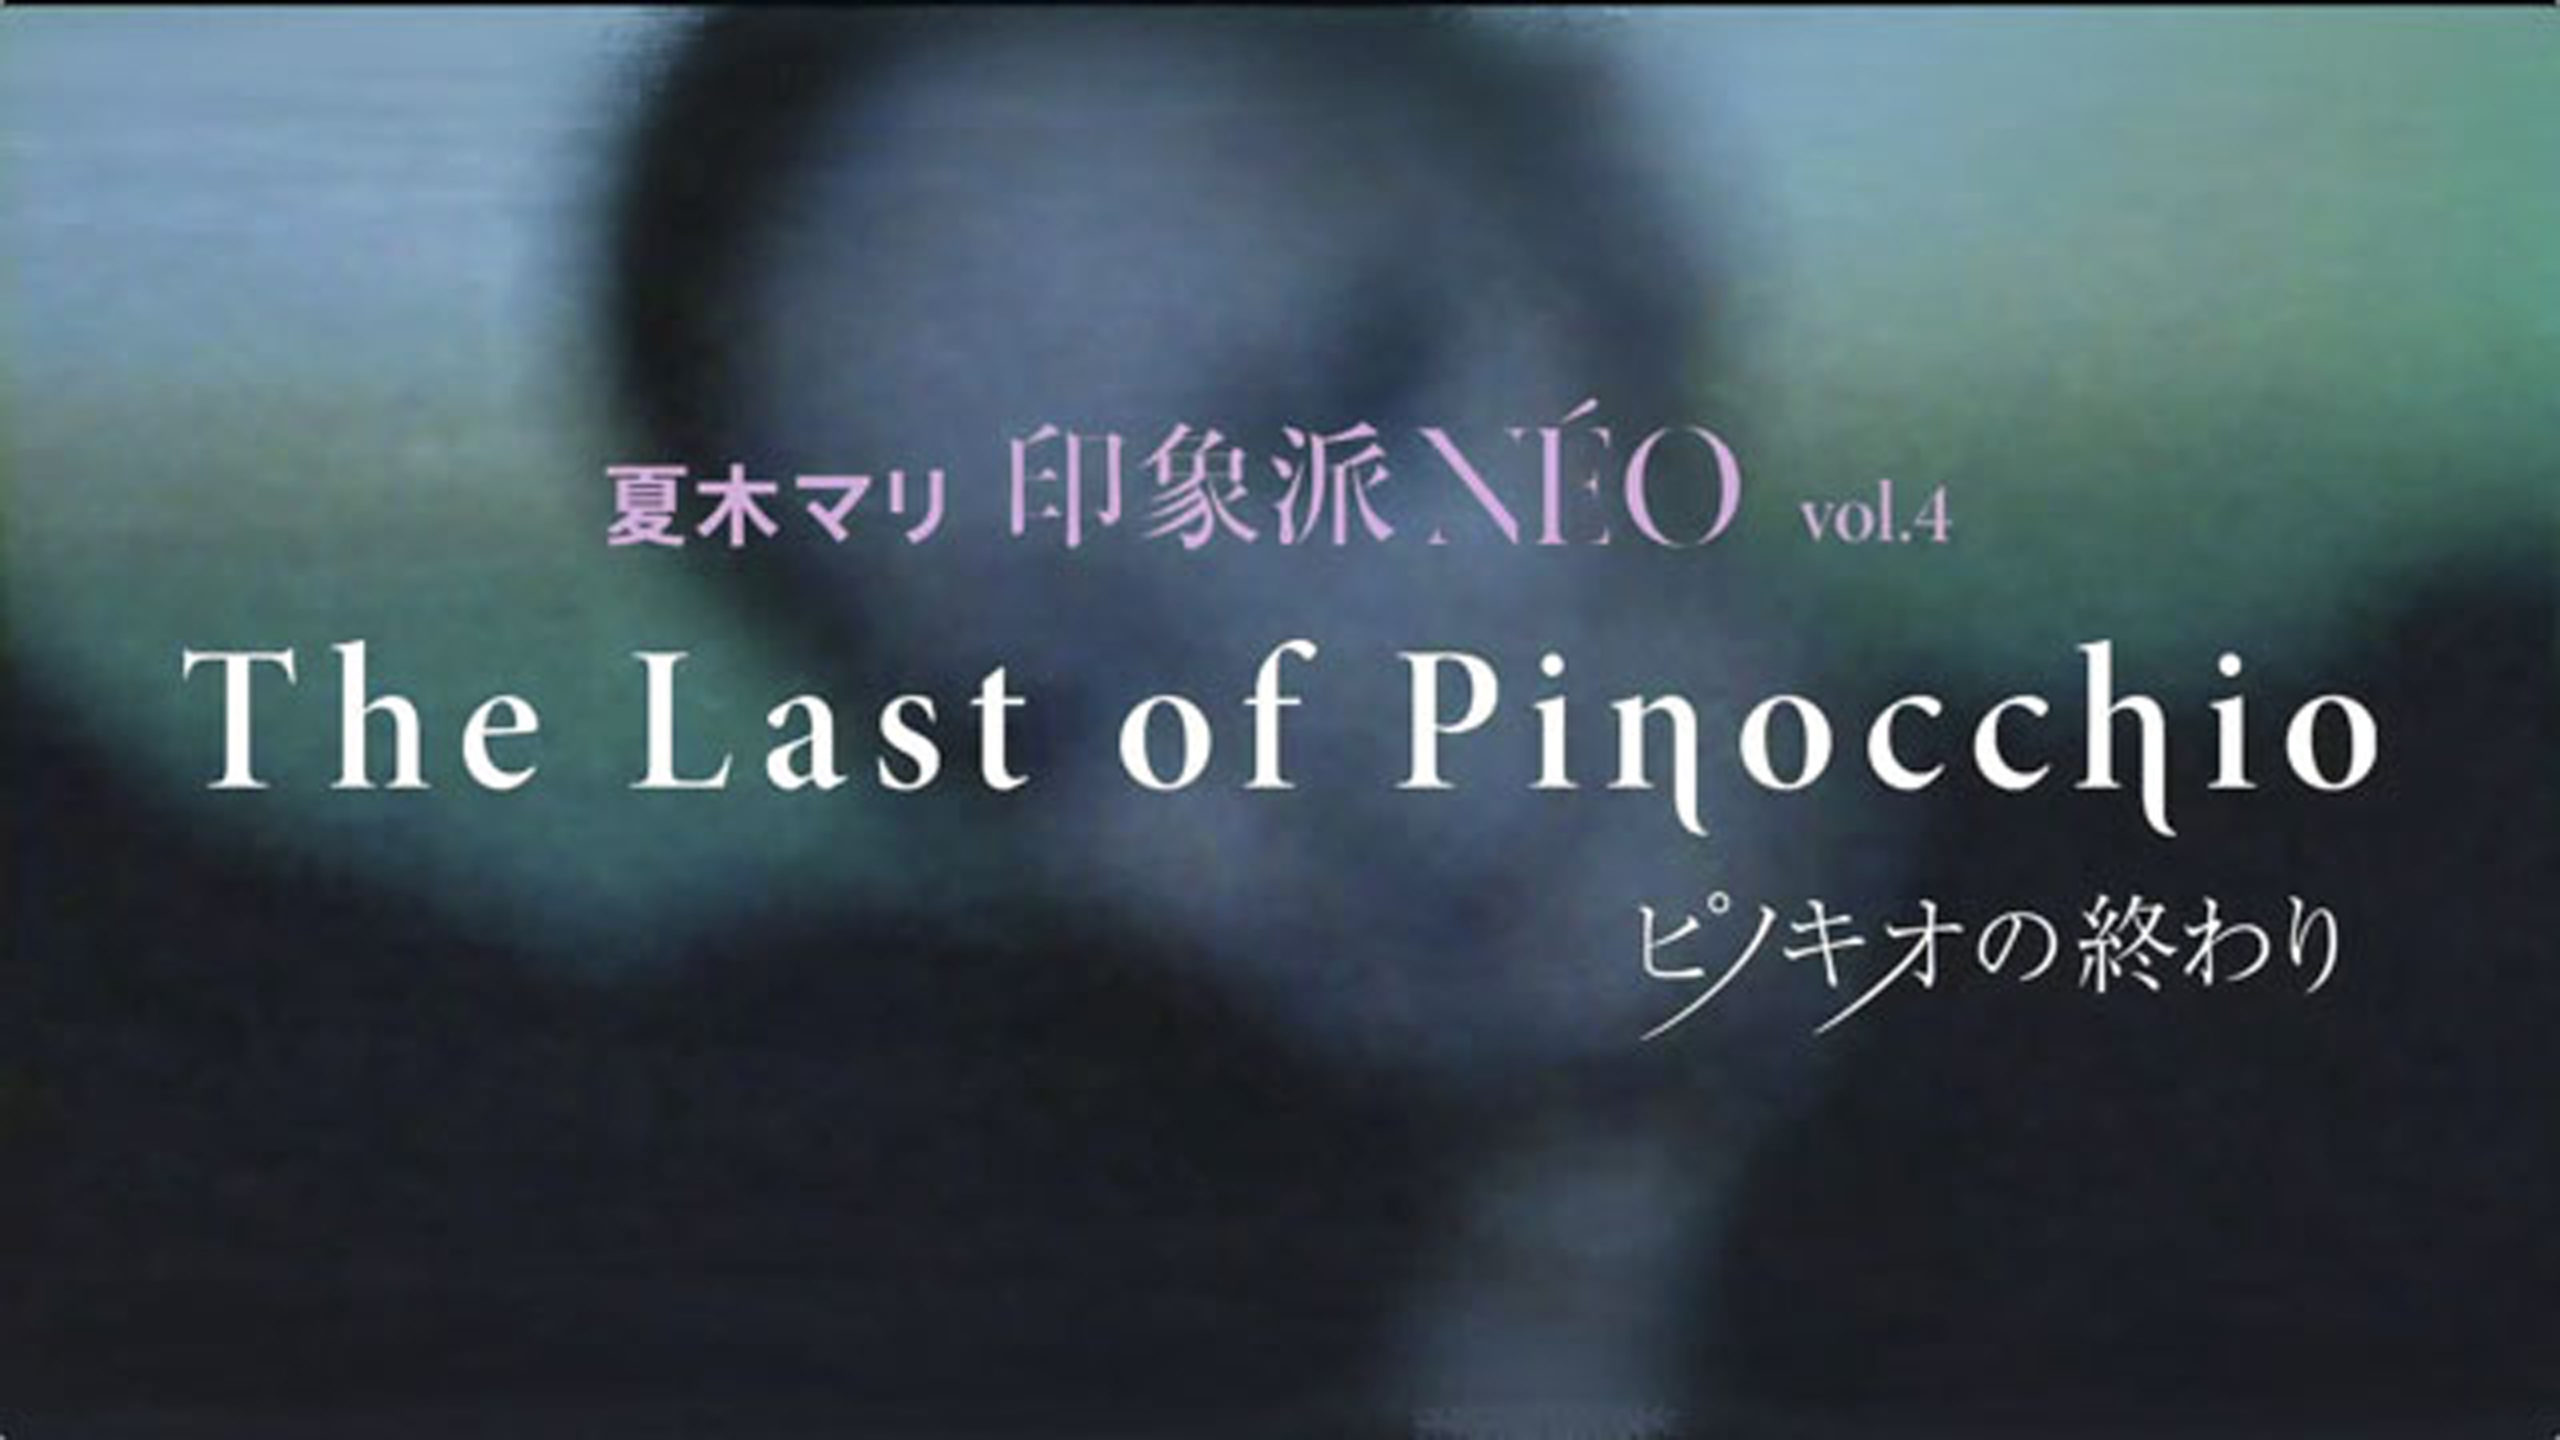 Inshouha NEO vol.4 – The Last of Pinocchio <br>Promotion Movie for Inshouha